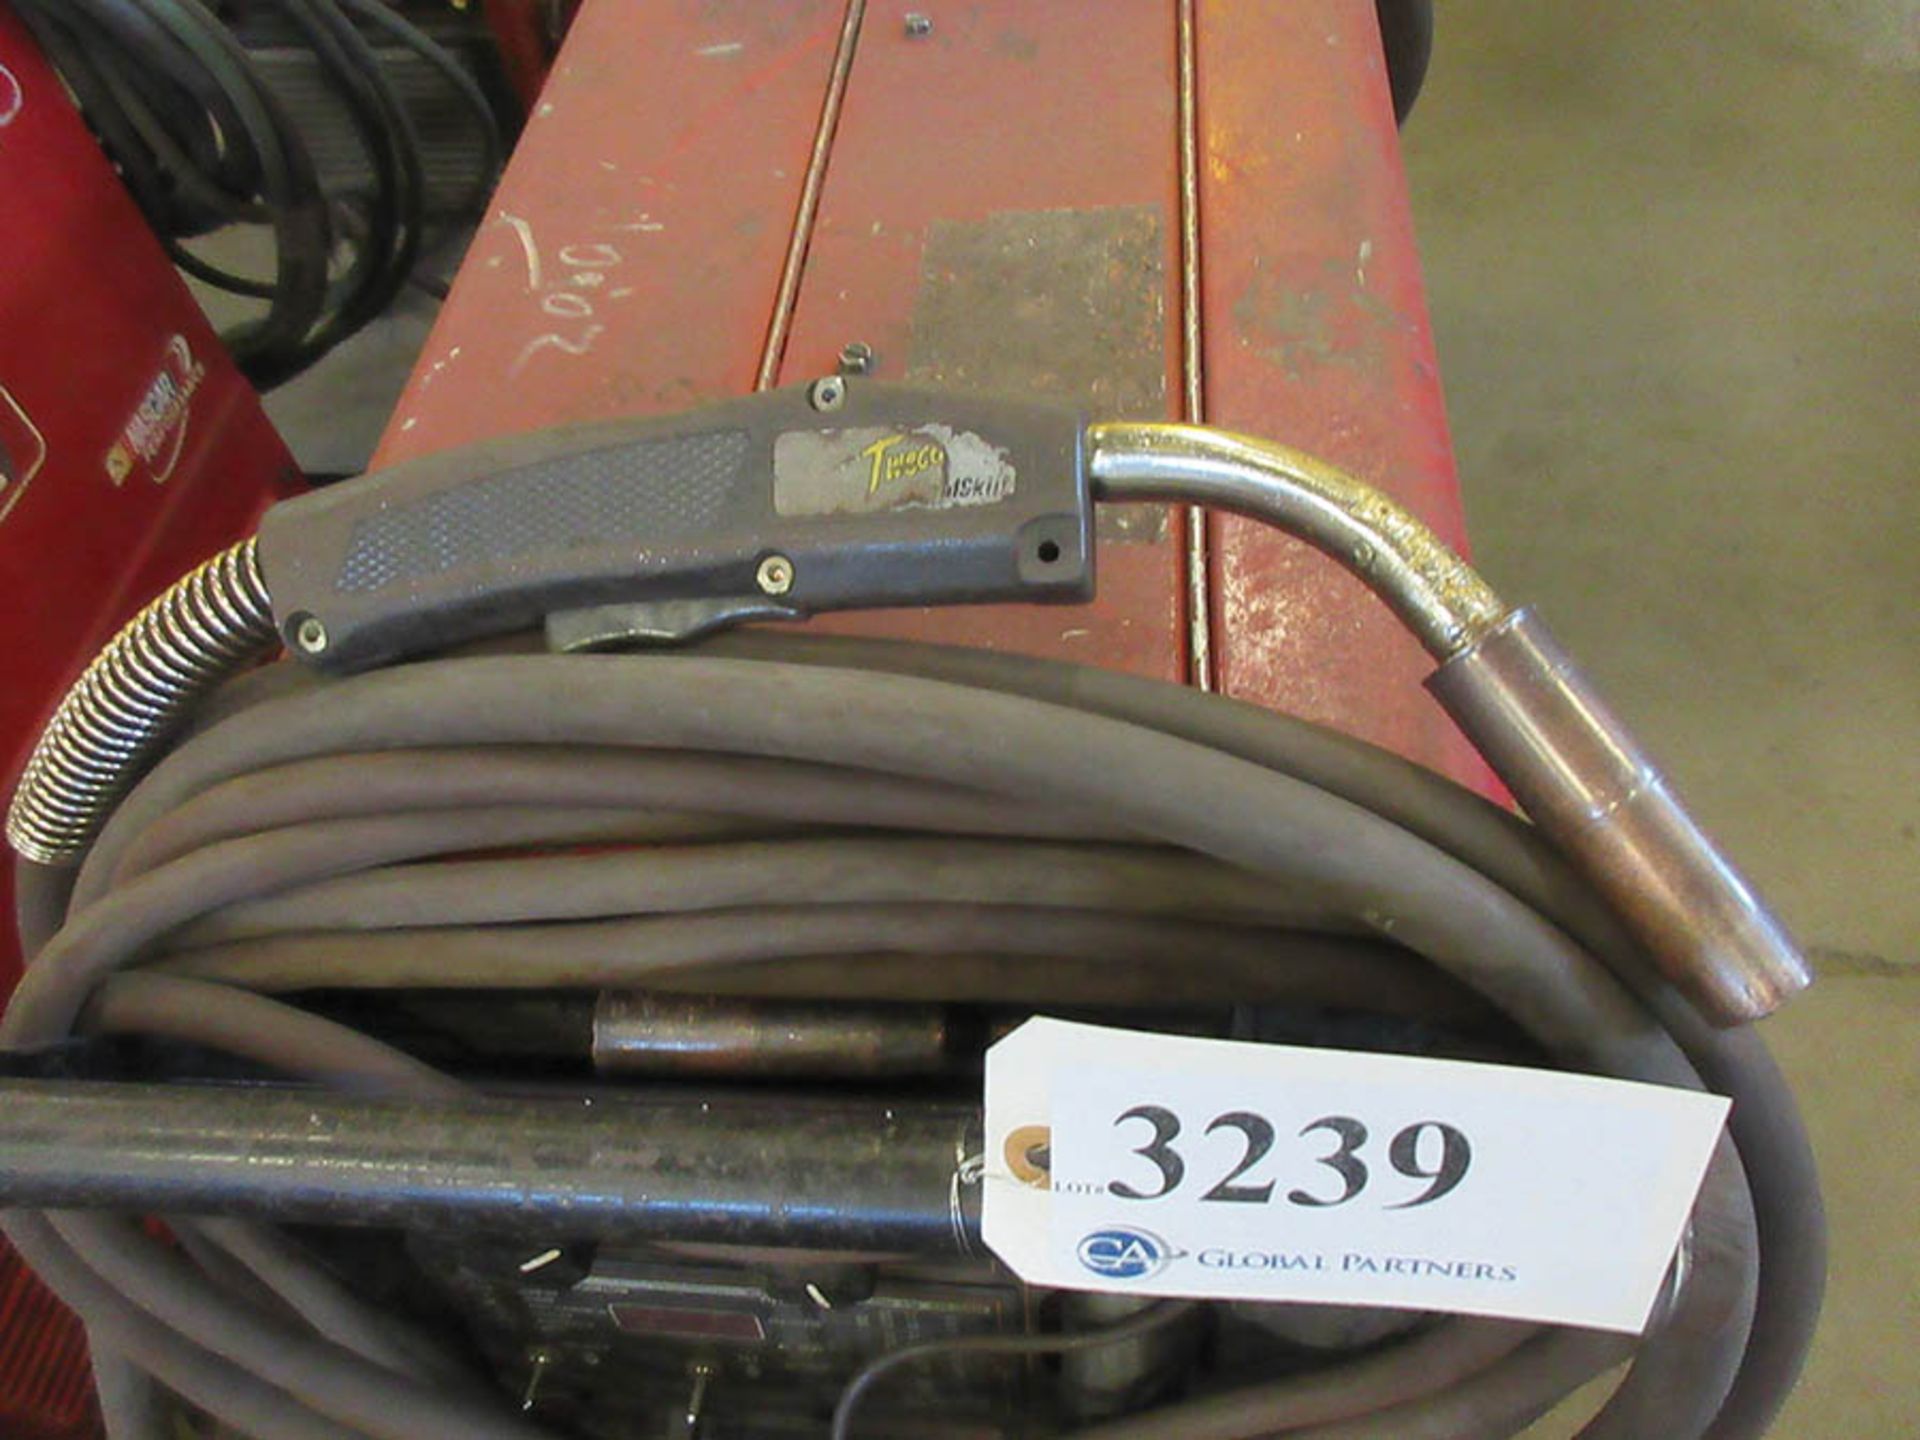 LINCOLN ELECTRIC 350MP POWER MIG WELDER WITH TWECO WELDSKILL MIG GUN, #36 - Image 3 of 3